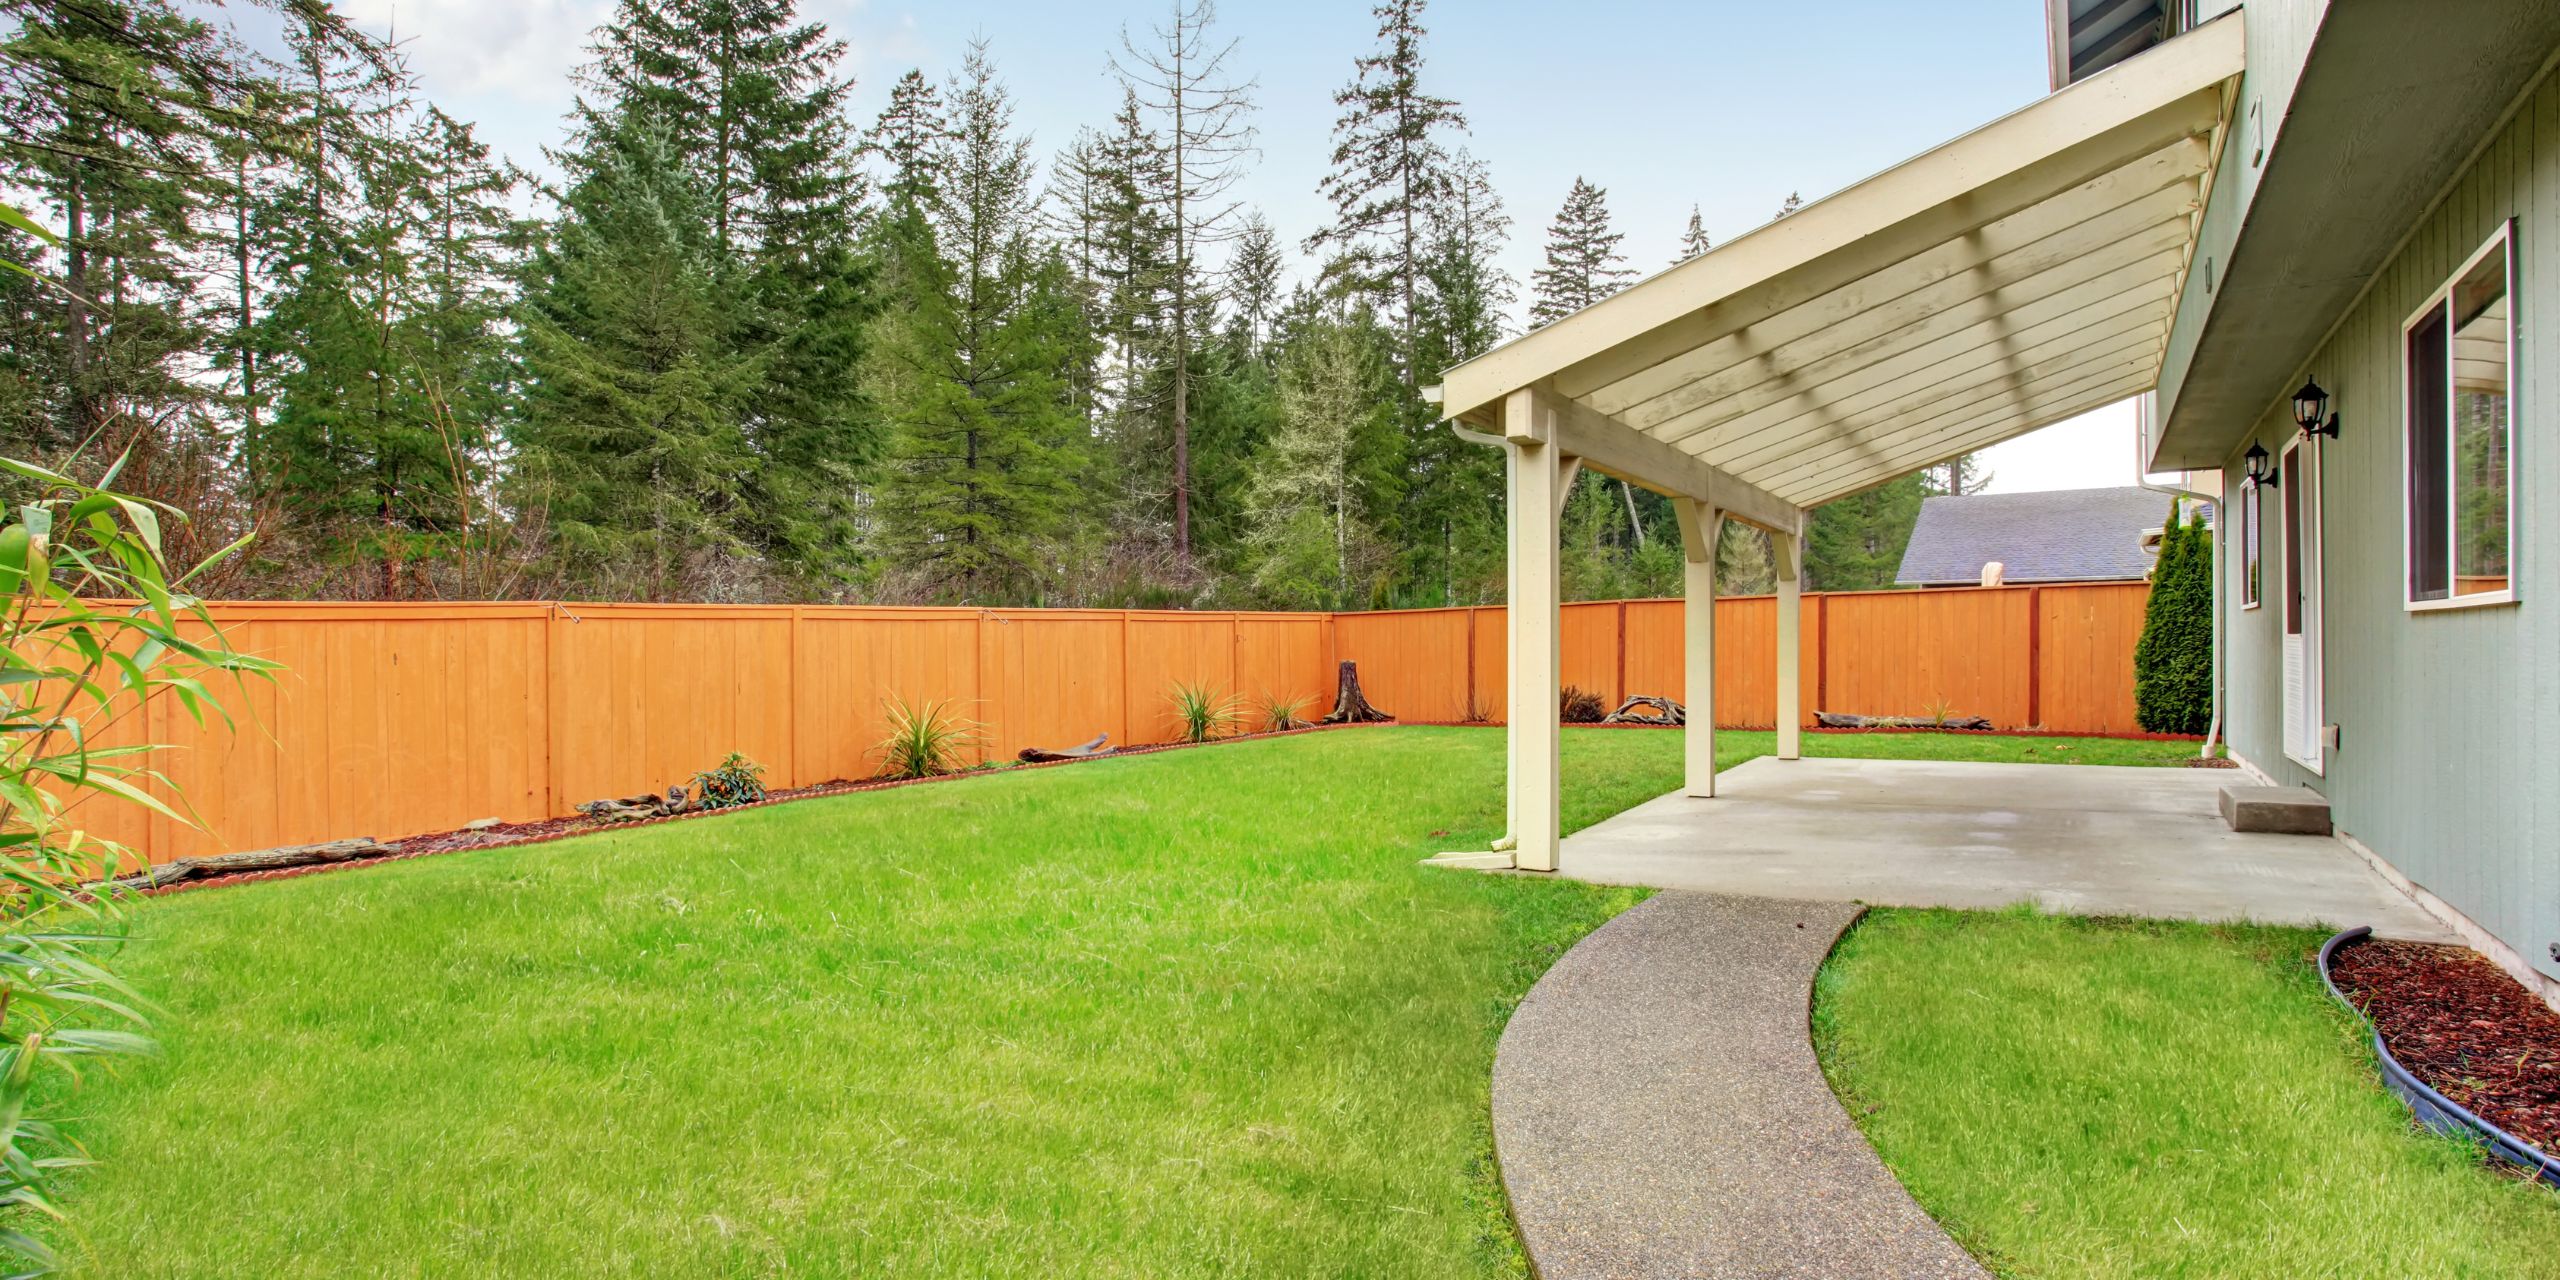 Protect Your Property: The Benefits of Upgrading Your Patio Cover and Garage Doors